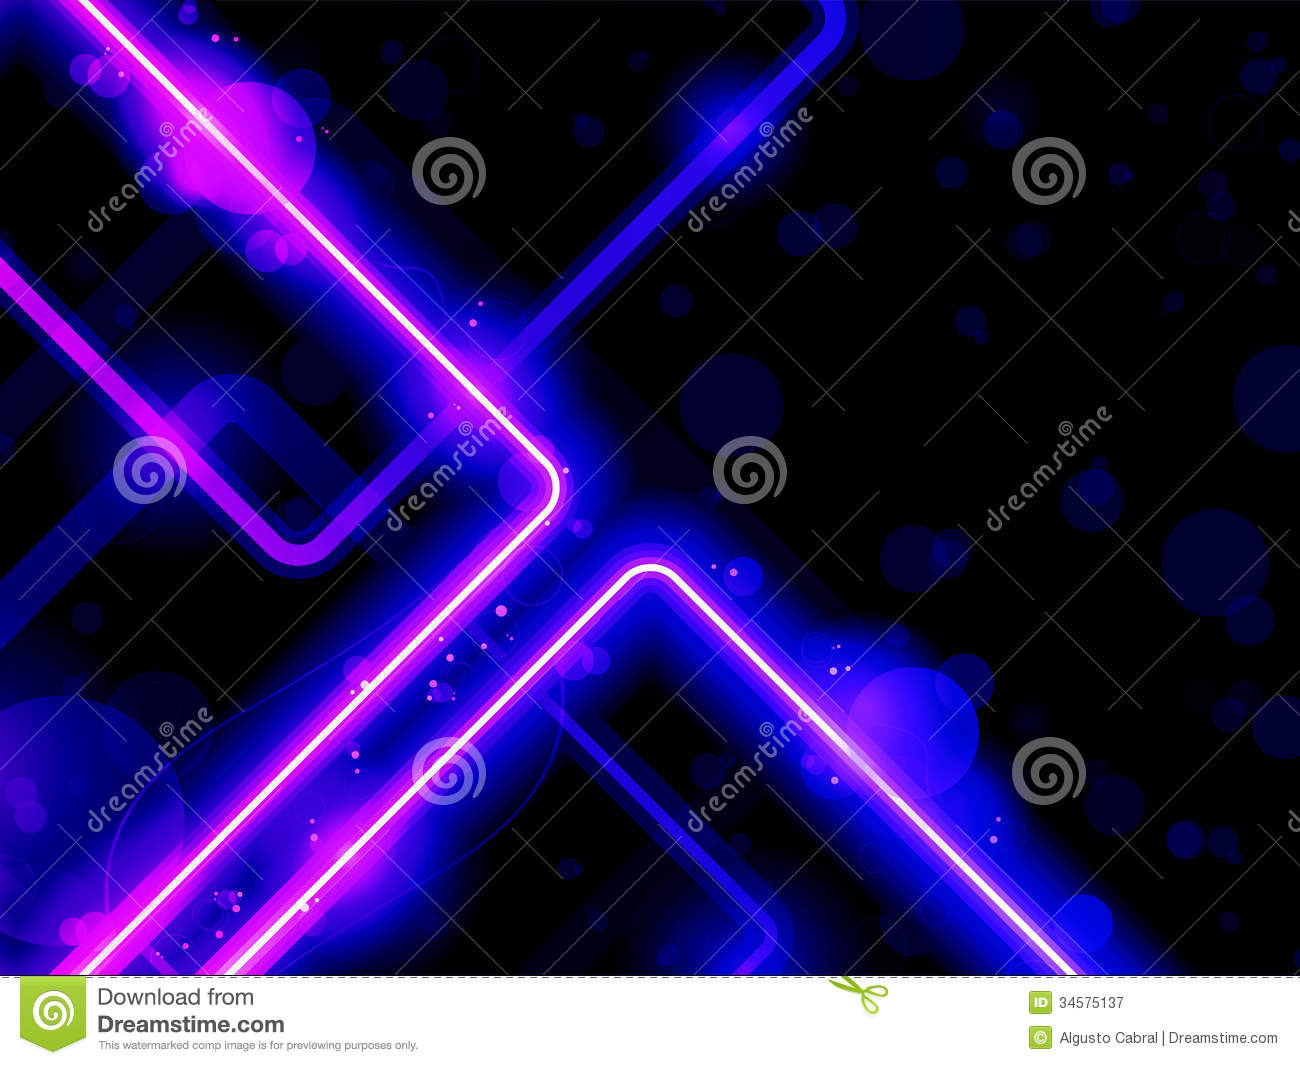 Cool Purple Neon Backgrounds Images Pictures   Becuo